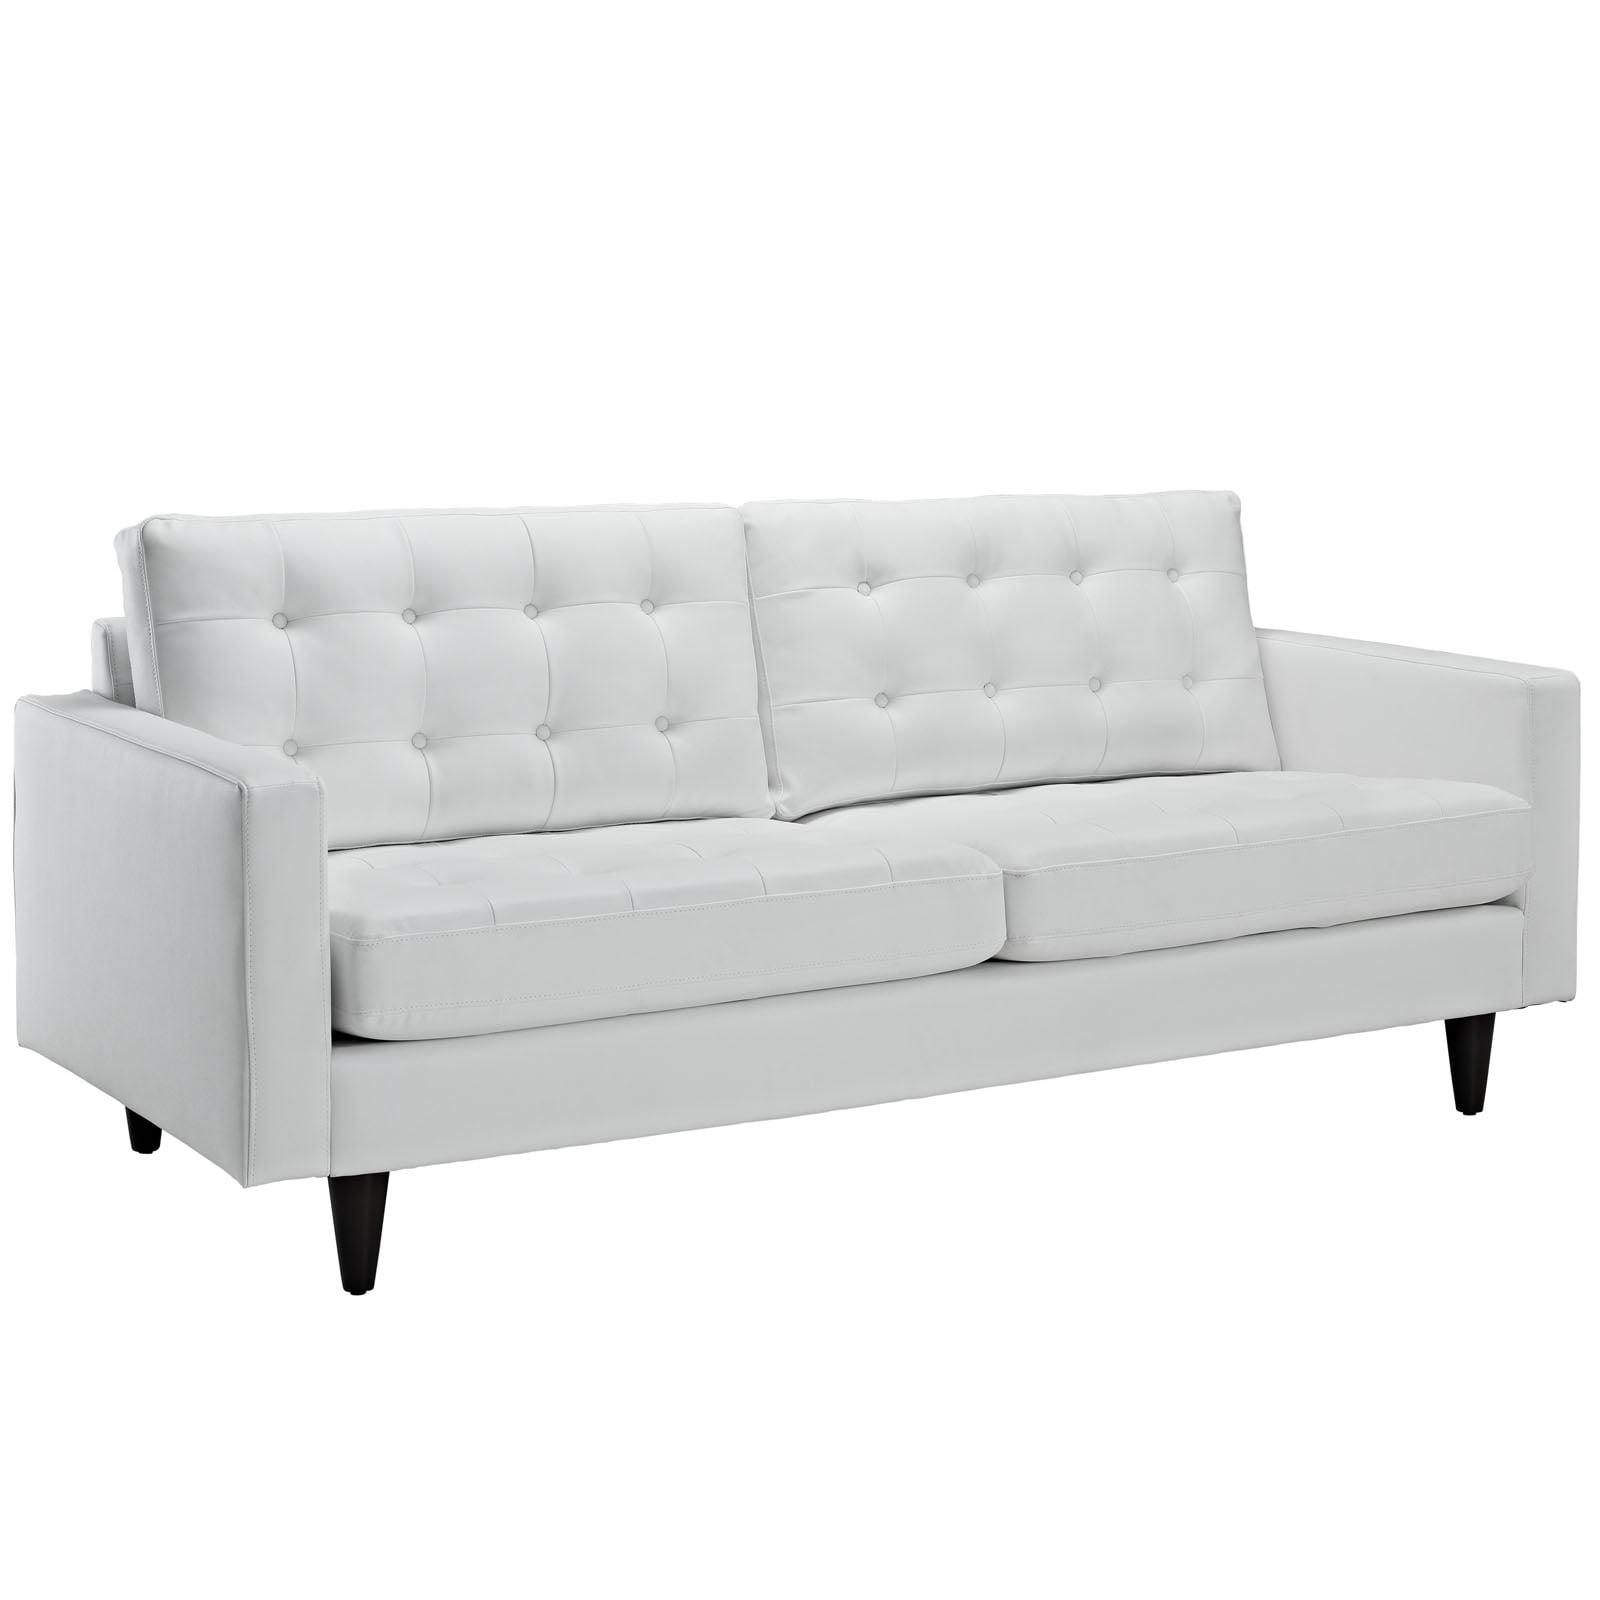 Modern Contemporary Living Room Leather, Modern White Leather Living Room Furniture